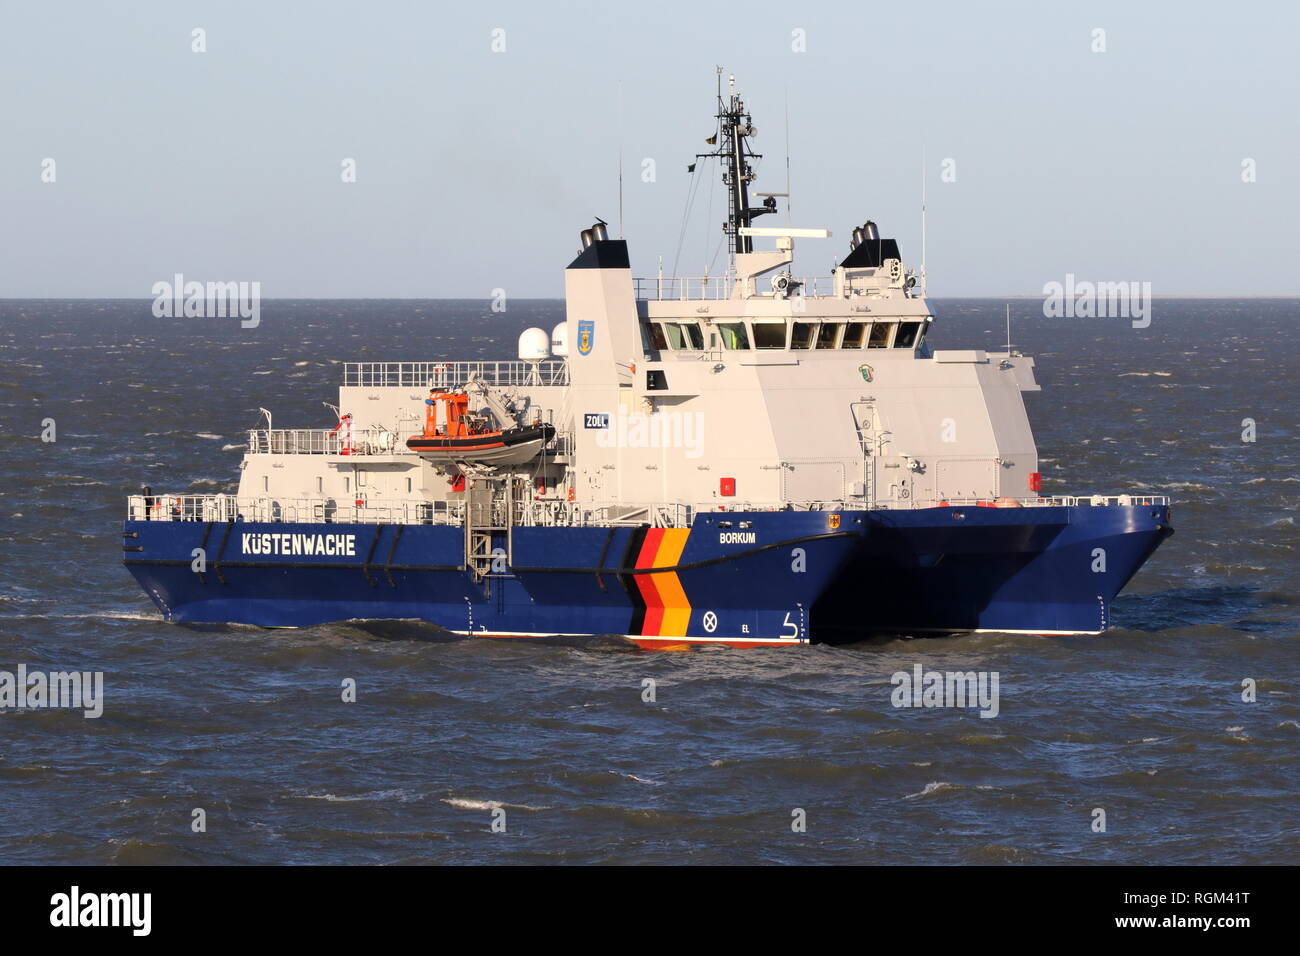 The ship of the Coast Guard Borkum happened on January 2, 2019 Cuxhaven on the Elbe. Stock Photo